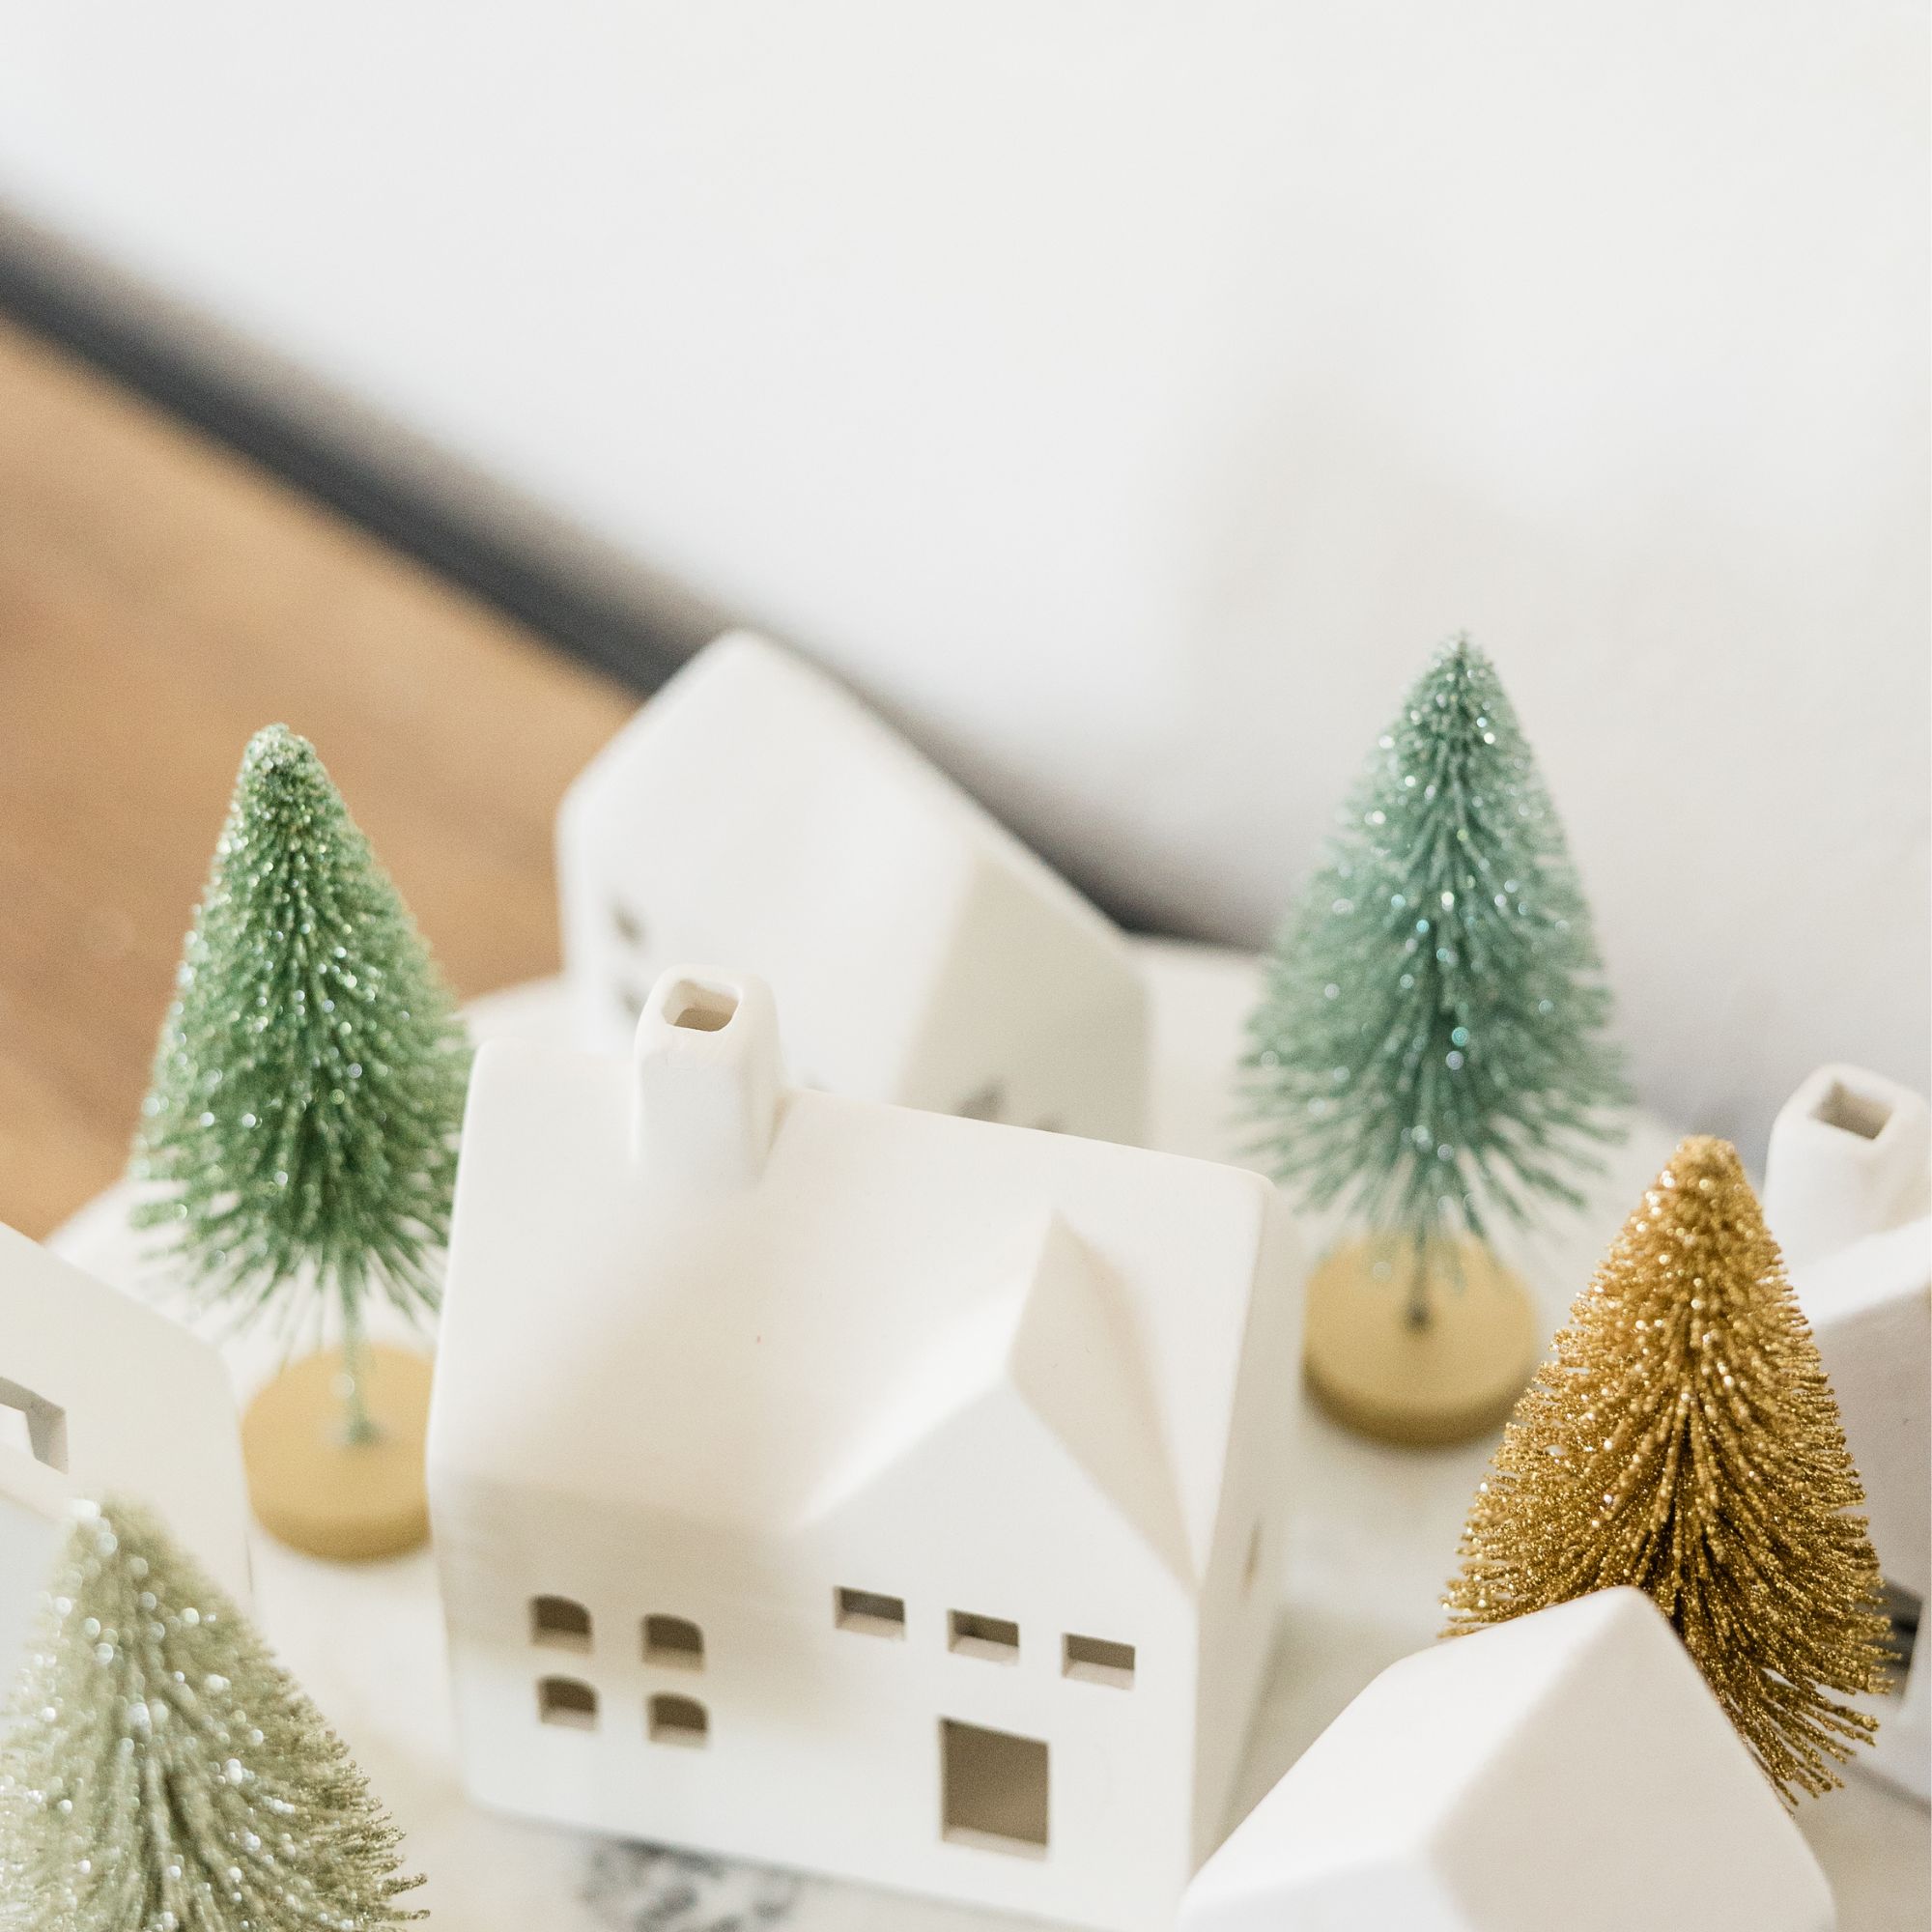 Why Sell Your Home During the Holidays?